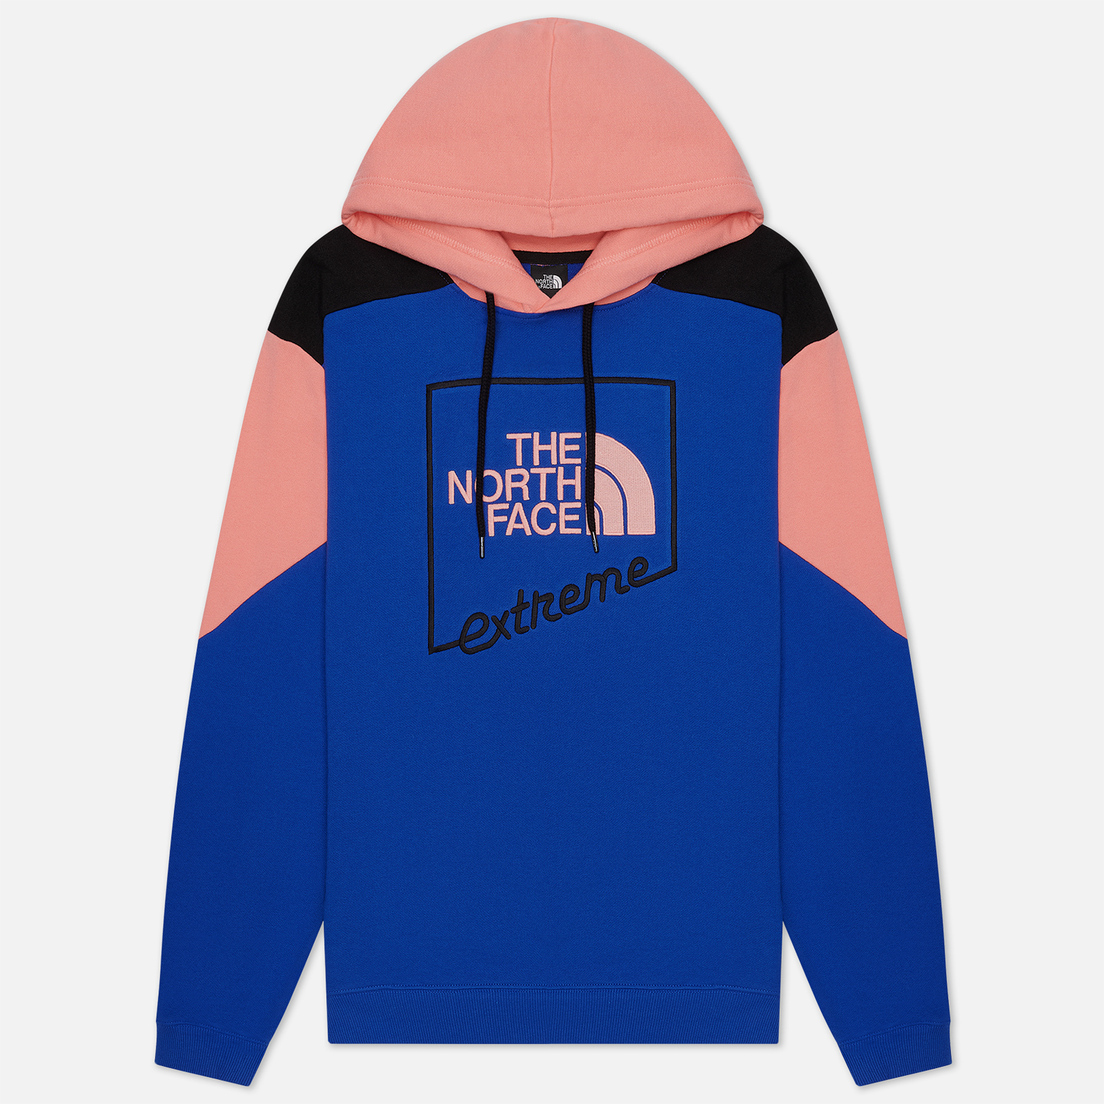 The North Face Мужская толстовка Extreme Hoodie